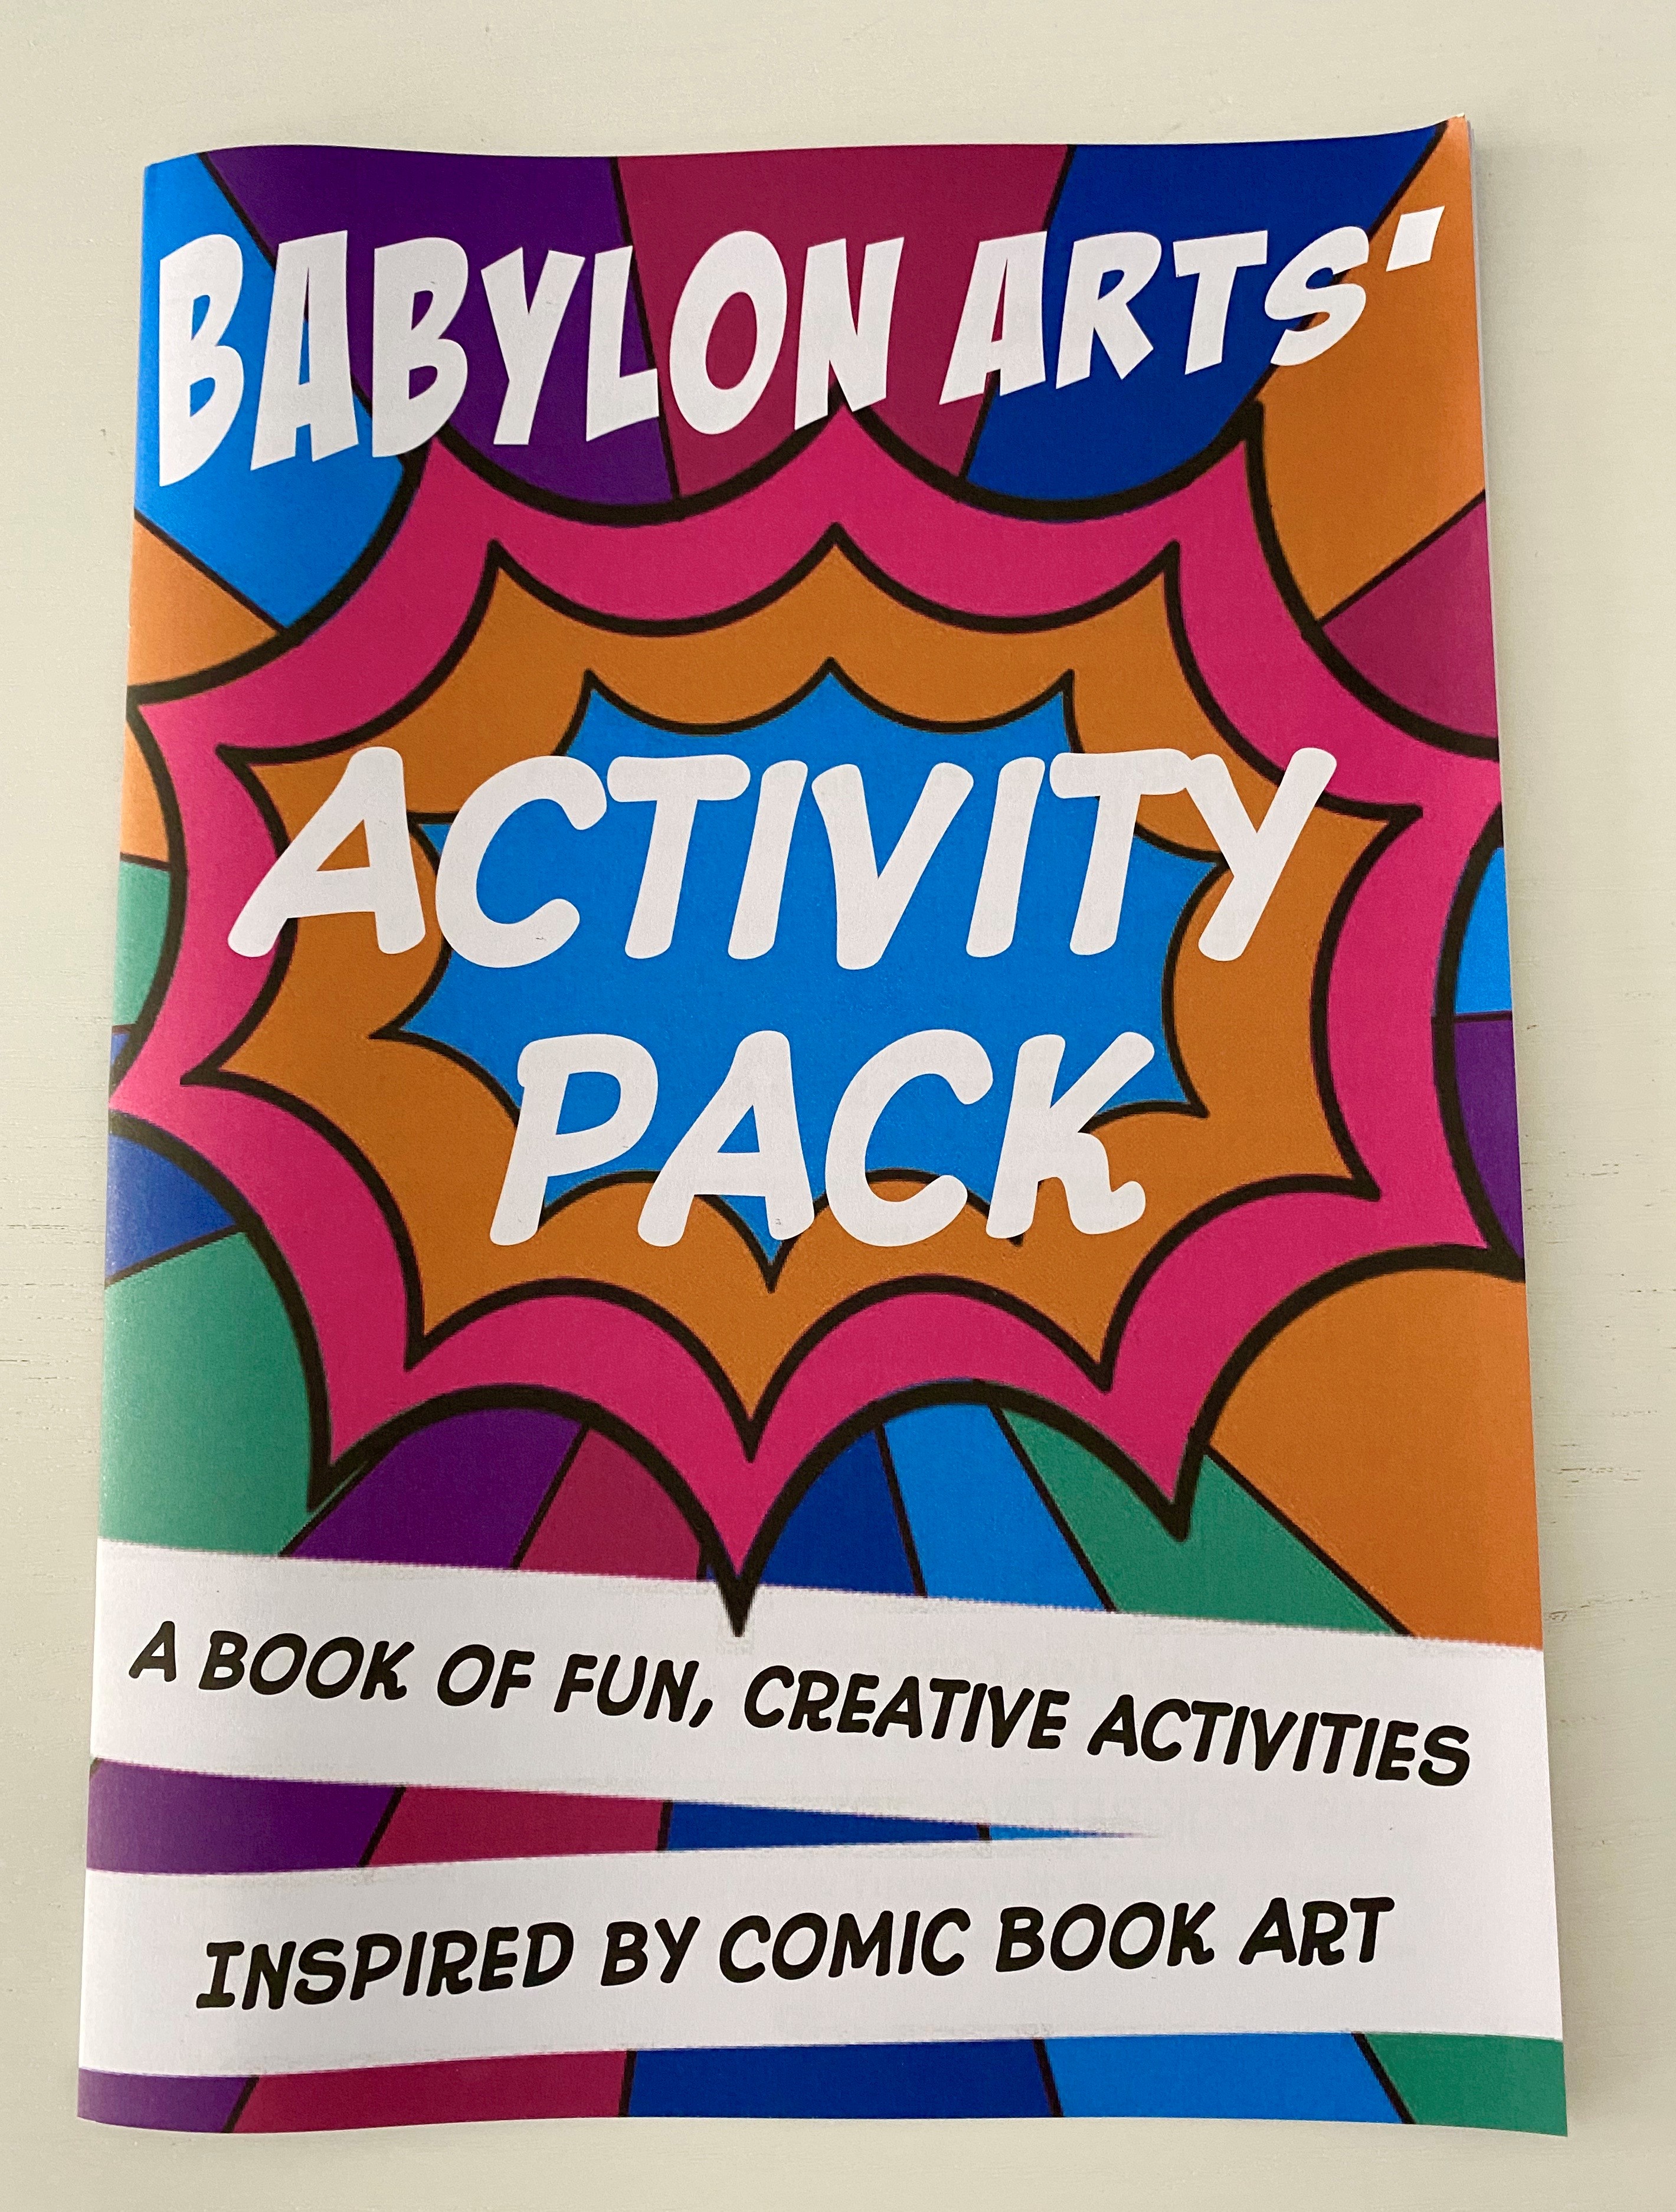 One of the activity packs created in collaboration with Manga artist, Irina Richards and Babylon ARTS - full of fun, comic book inspired activities for children and young adults.